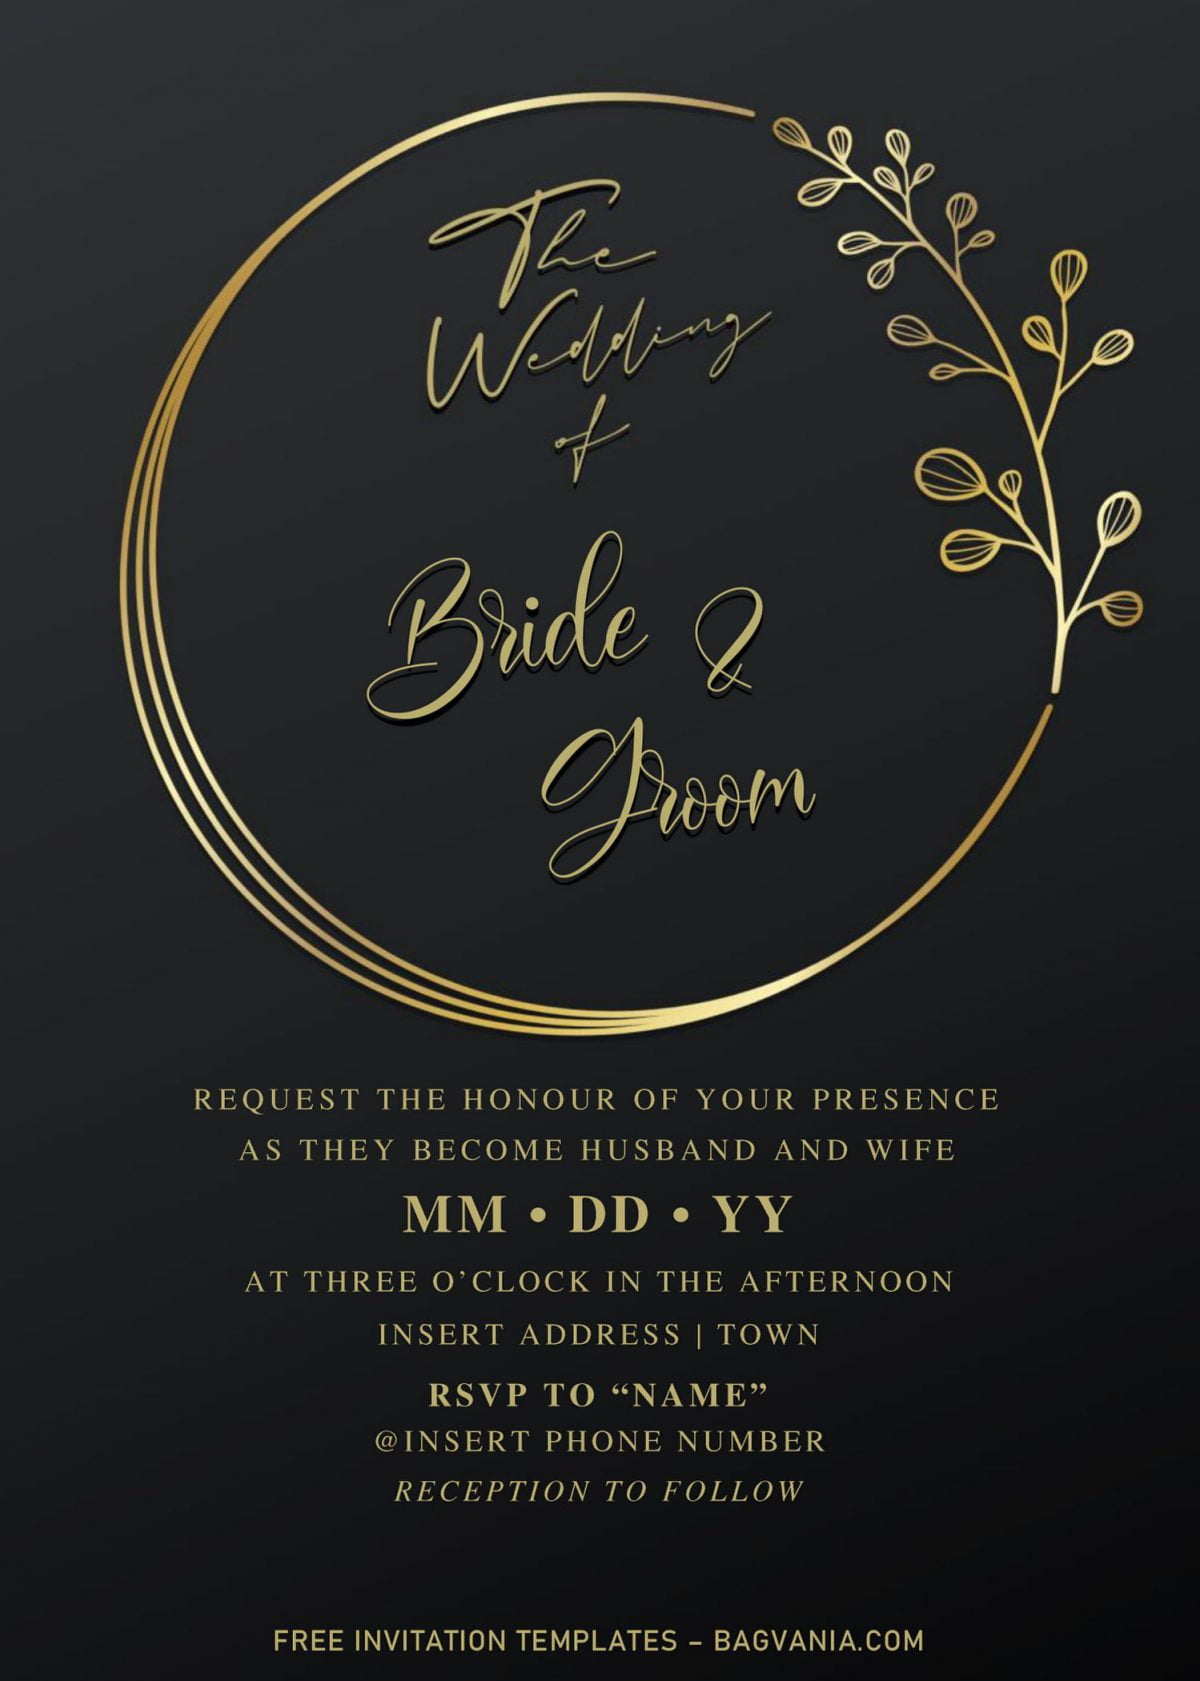 Free Elegant Black And Gold Wedding Invitation Templates For Word and has portrait orientation card